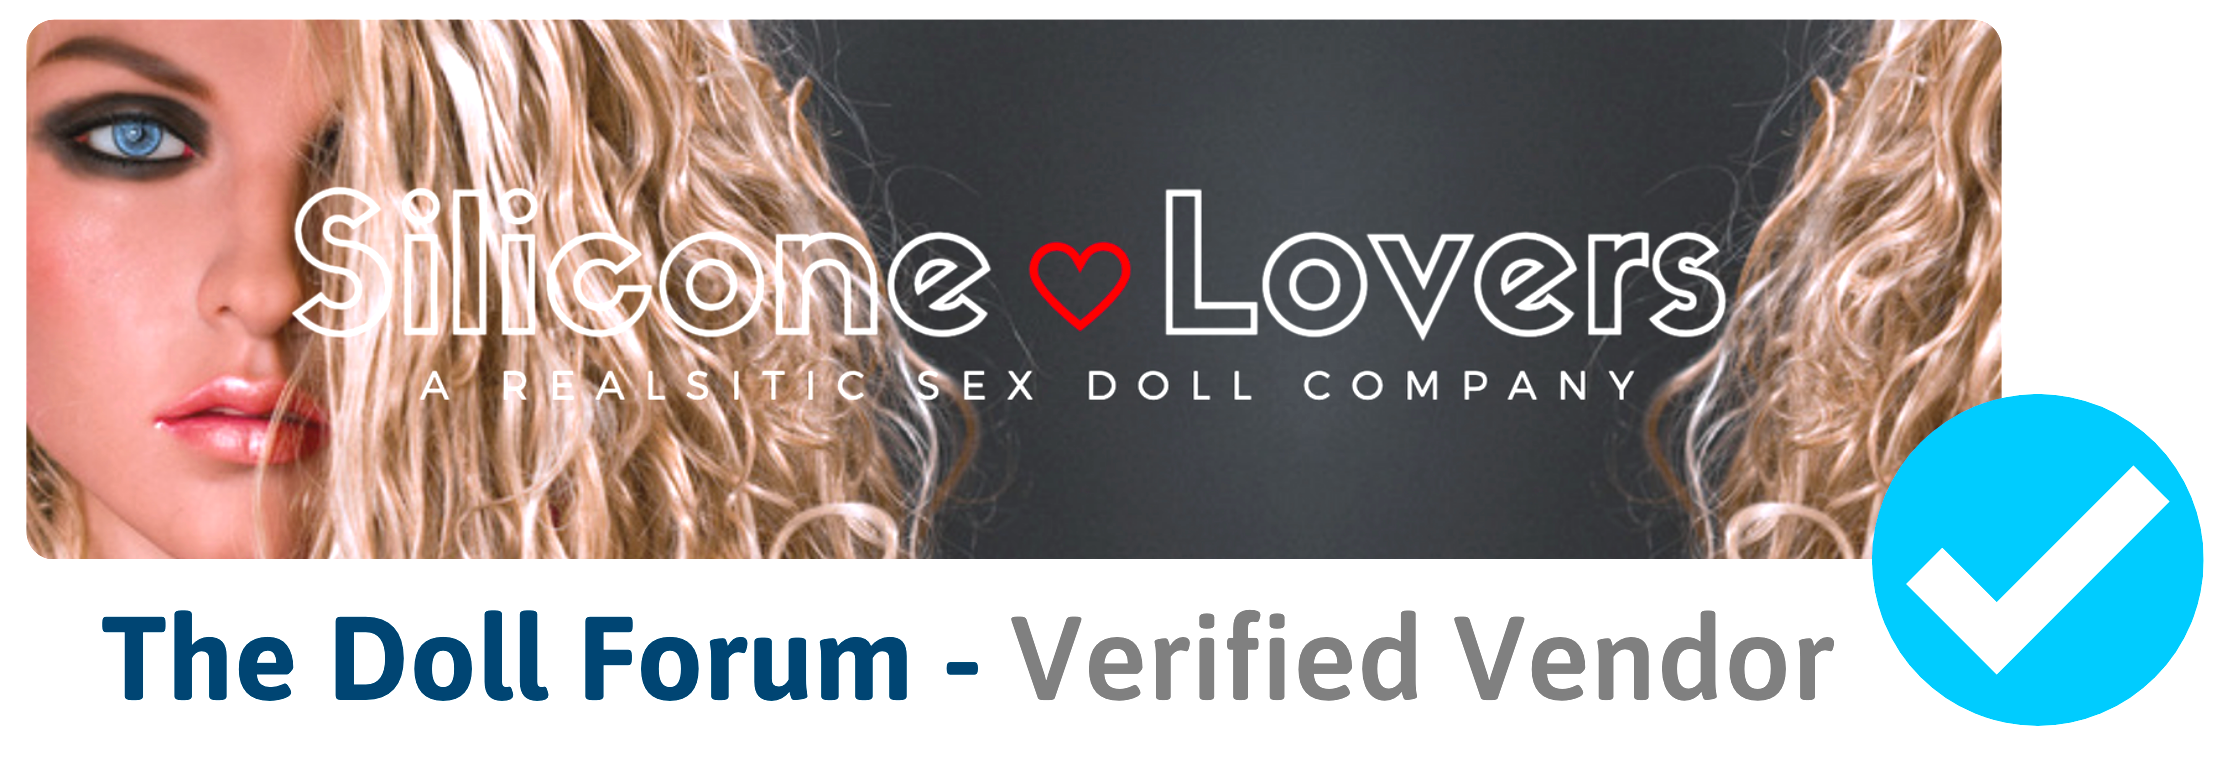 The Doll Forum Verified Vendor Silicone Lovers